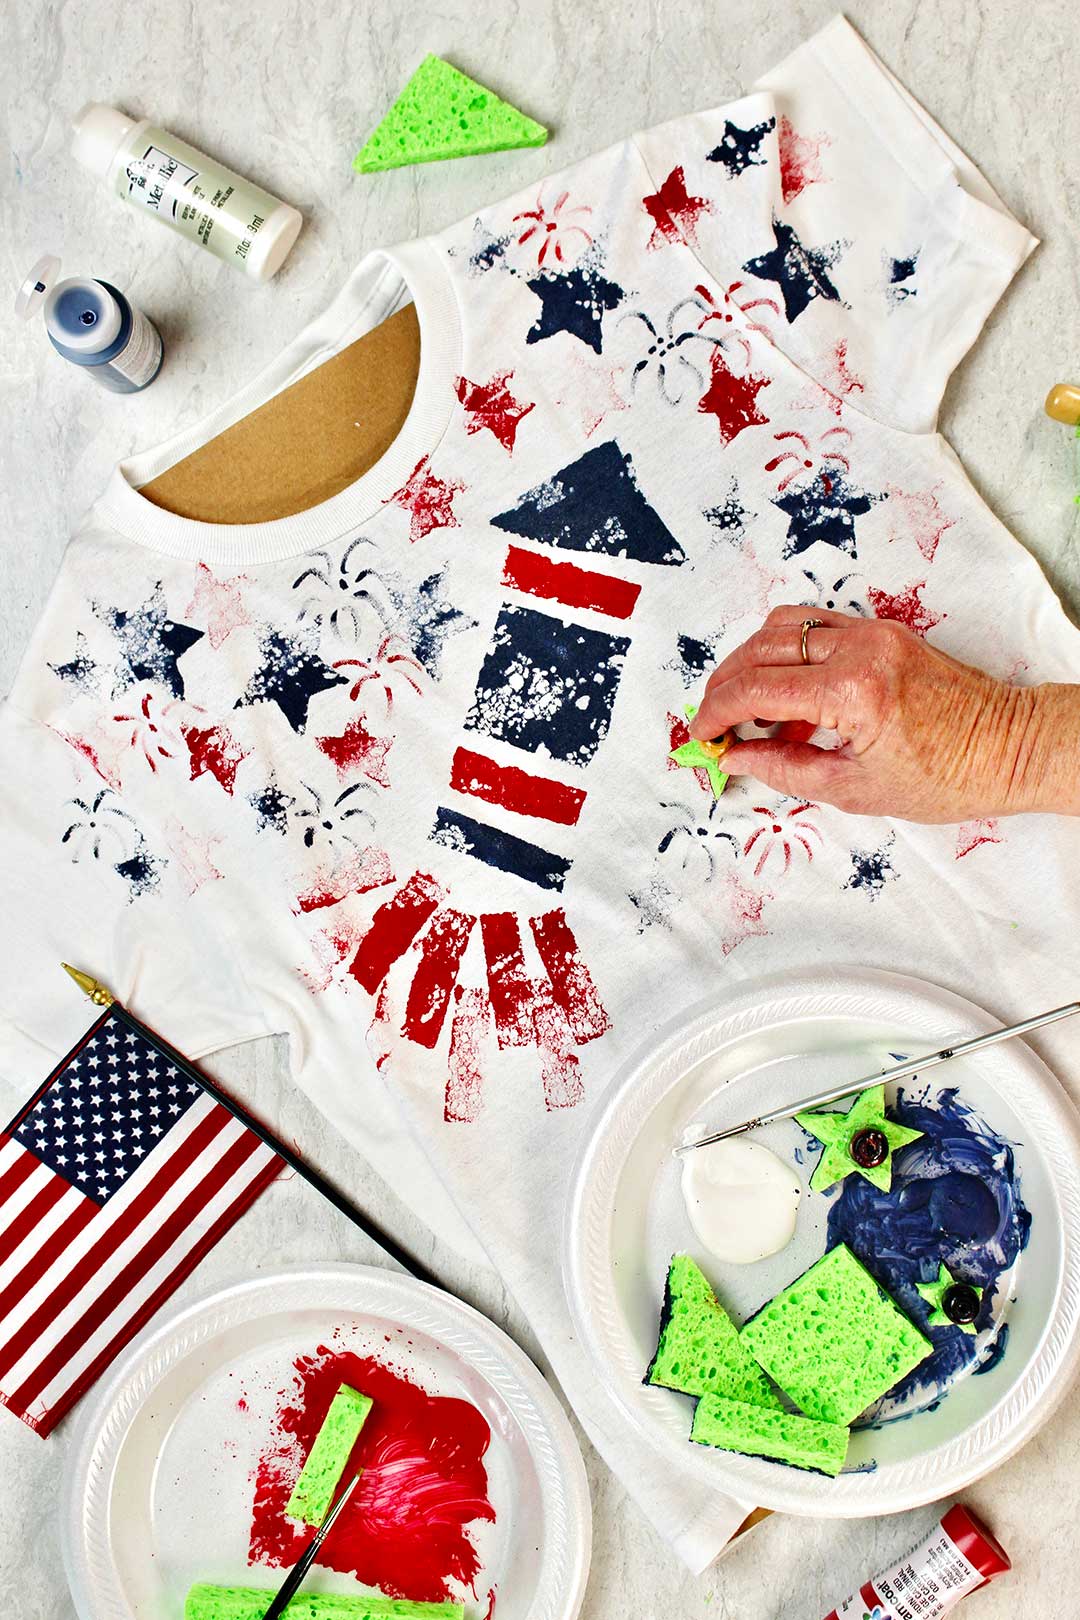 Hand placing sponge painted stars on white t-shirt with various craft supplies nearby.